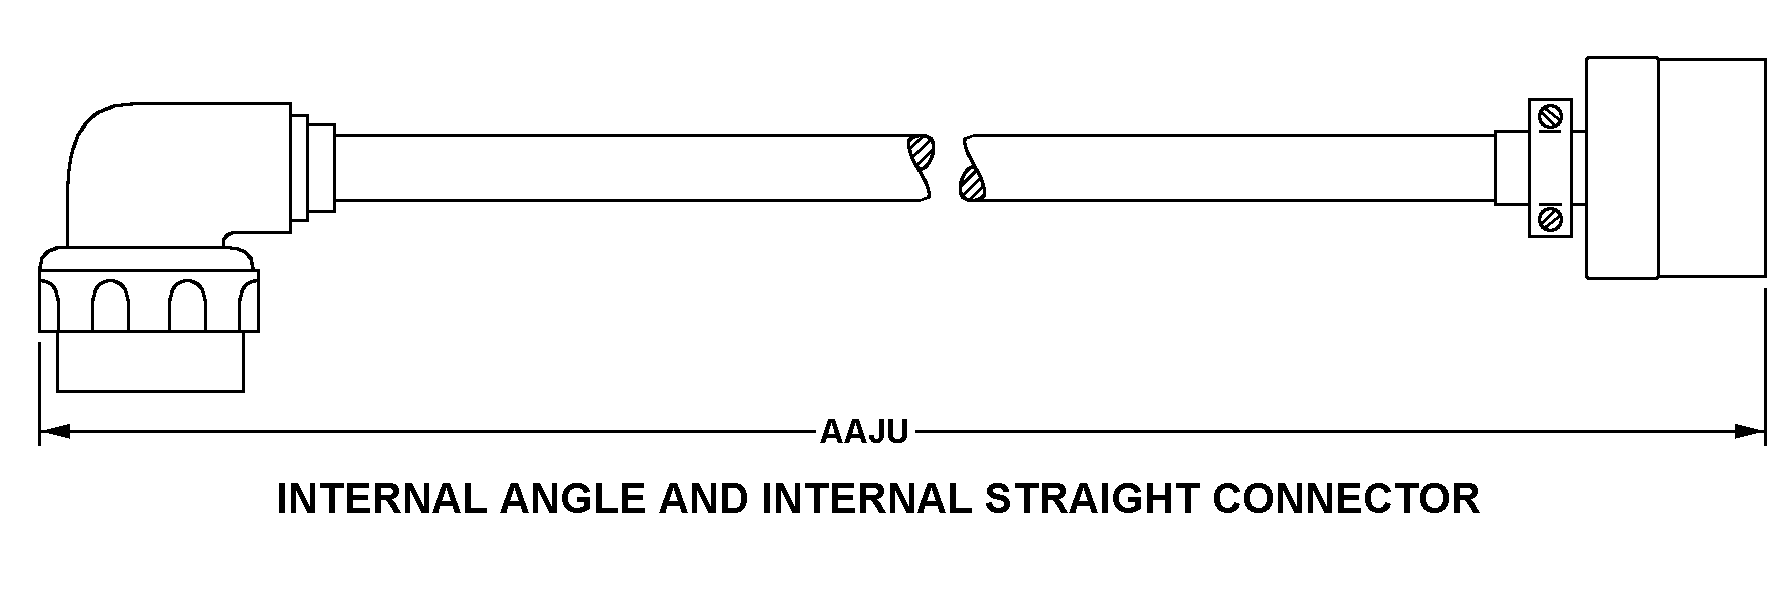 INTERNAL ANGLE AND INTERNAL STRAIGHT CONNECTOR style nsn 6150-01-073-4727